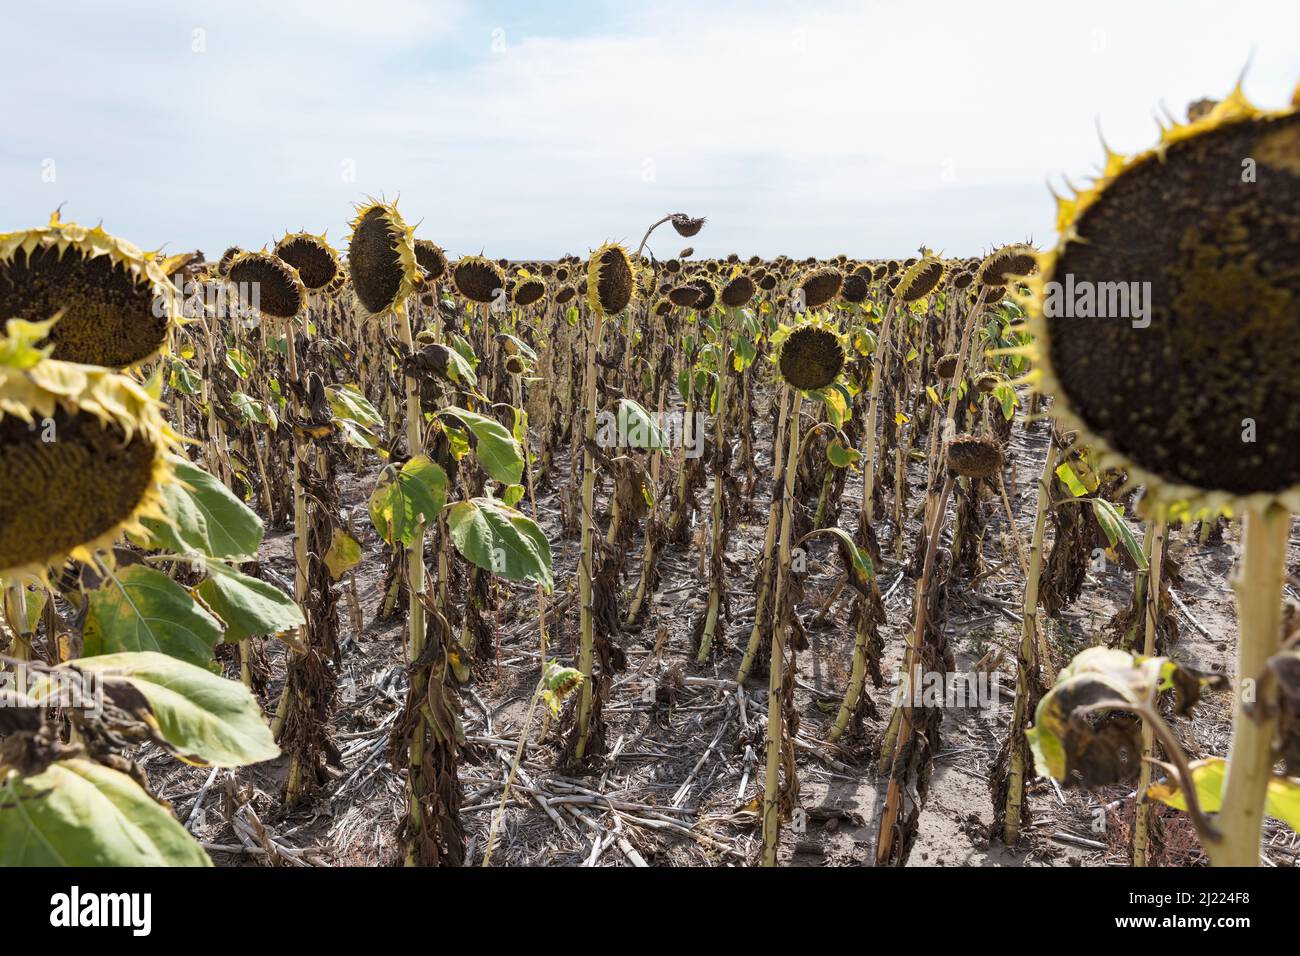 A field of sunflower plants, their heavy heads ripe with seed. Stock Photo